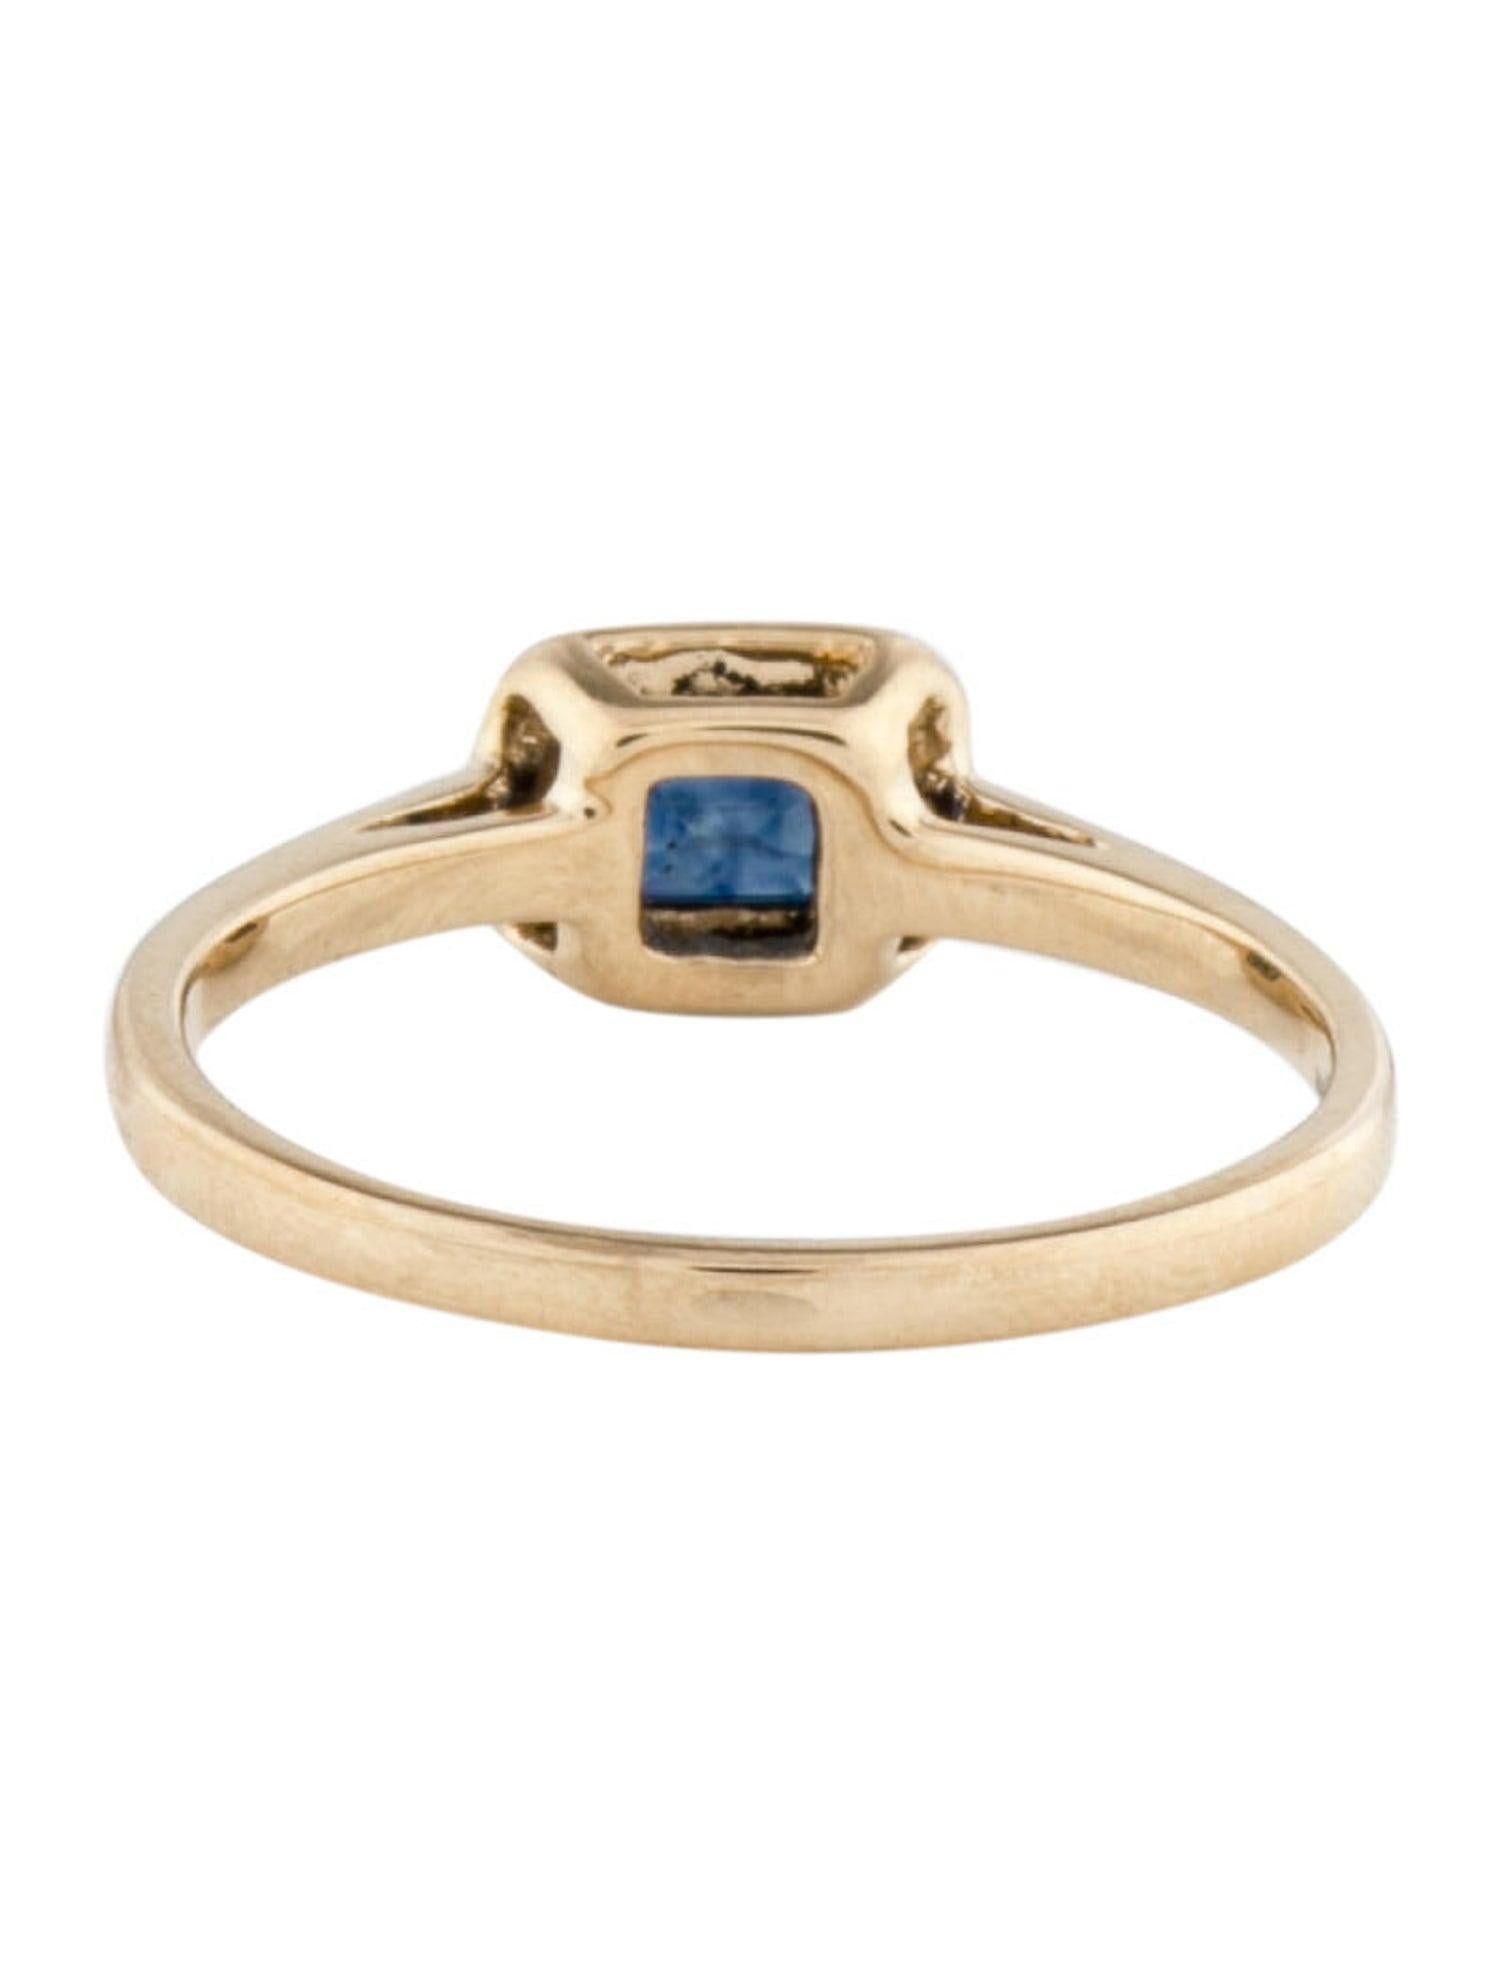 Contemporary 14k Yellow Gold & Emerald-Cut Blue Sapphire Ring 0.65 CTTW For Sale